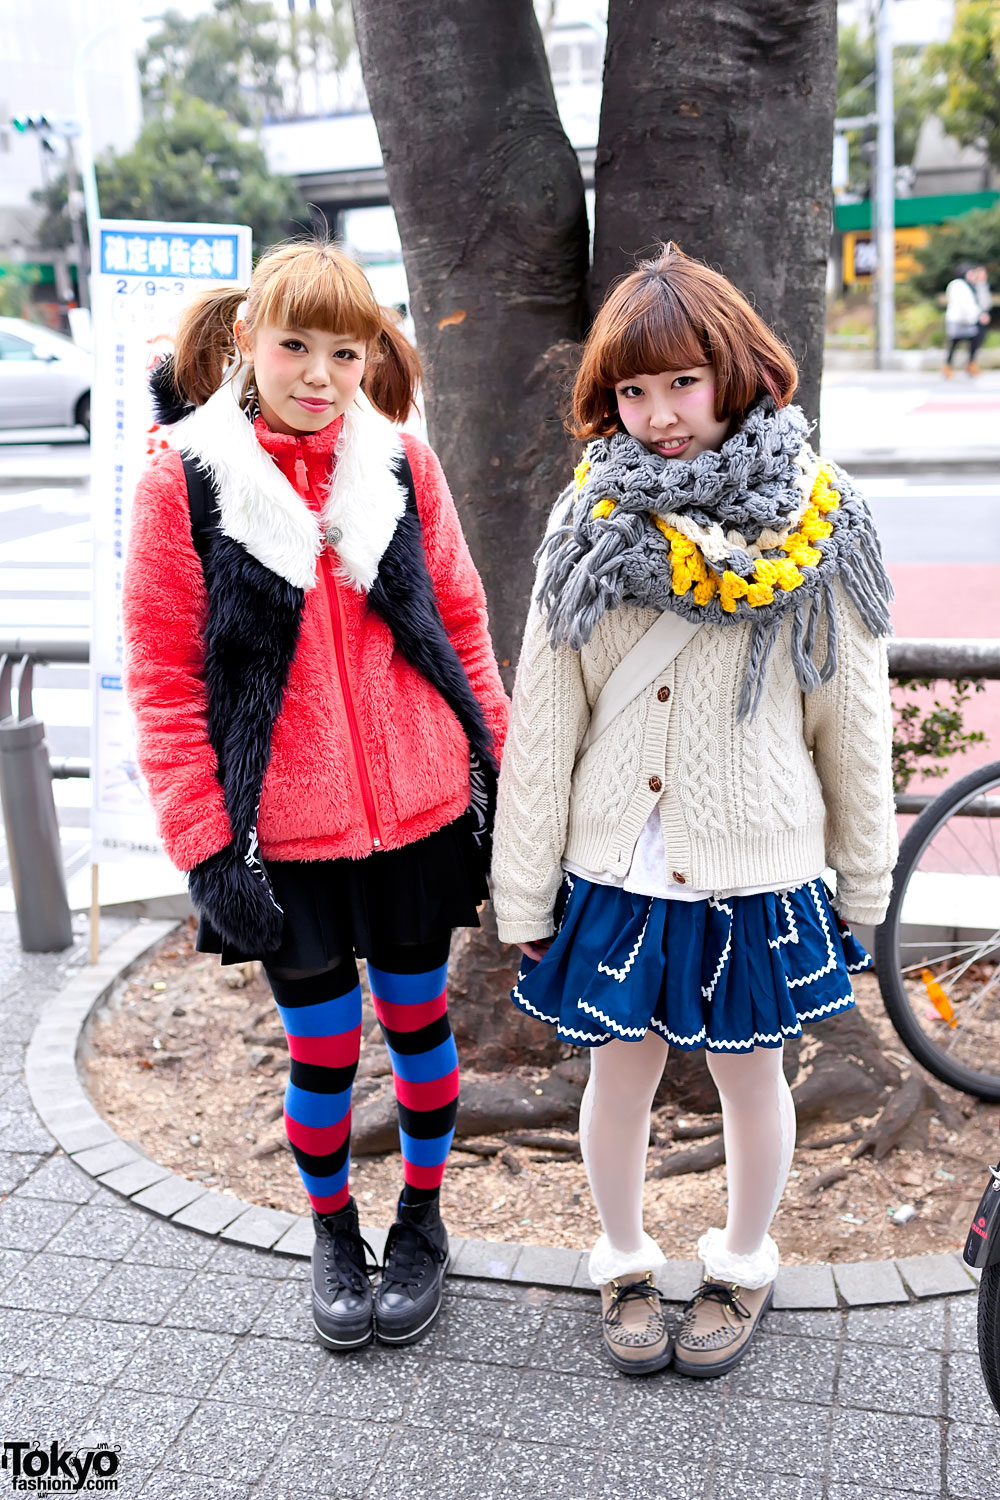 Cute Hairstyles, Cable Knit Sweater, Fuzzy Vest & Striped Socks in Shibuya